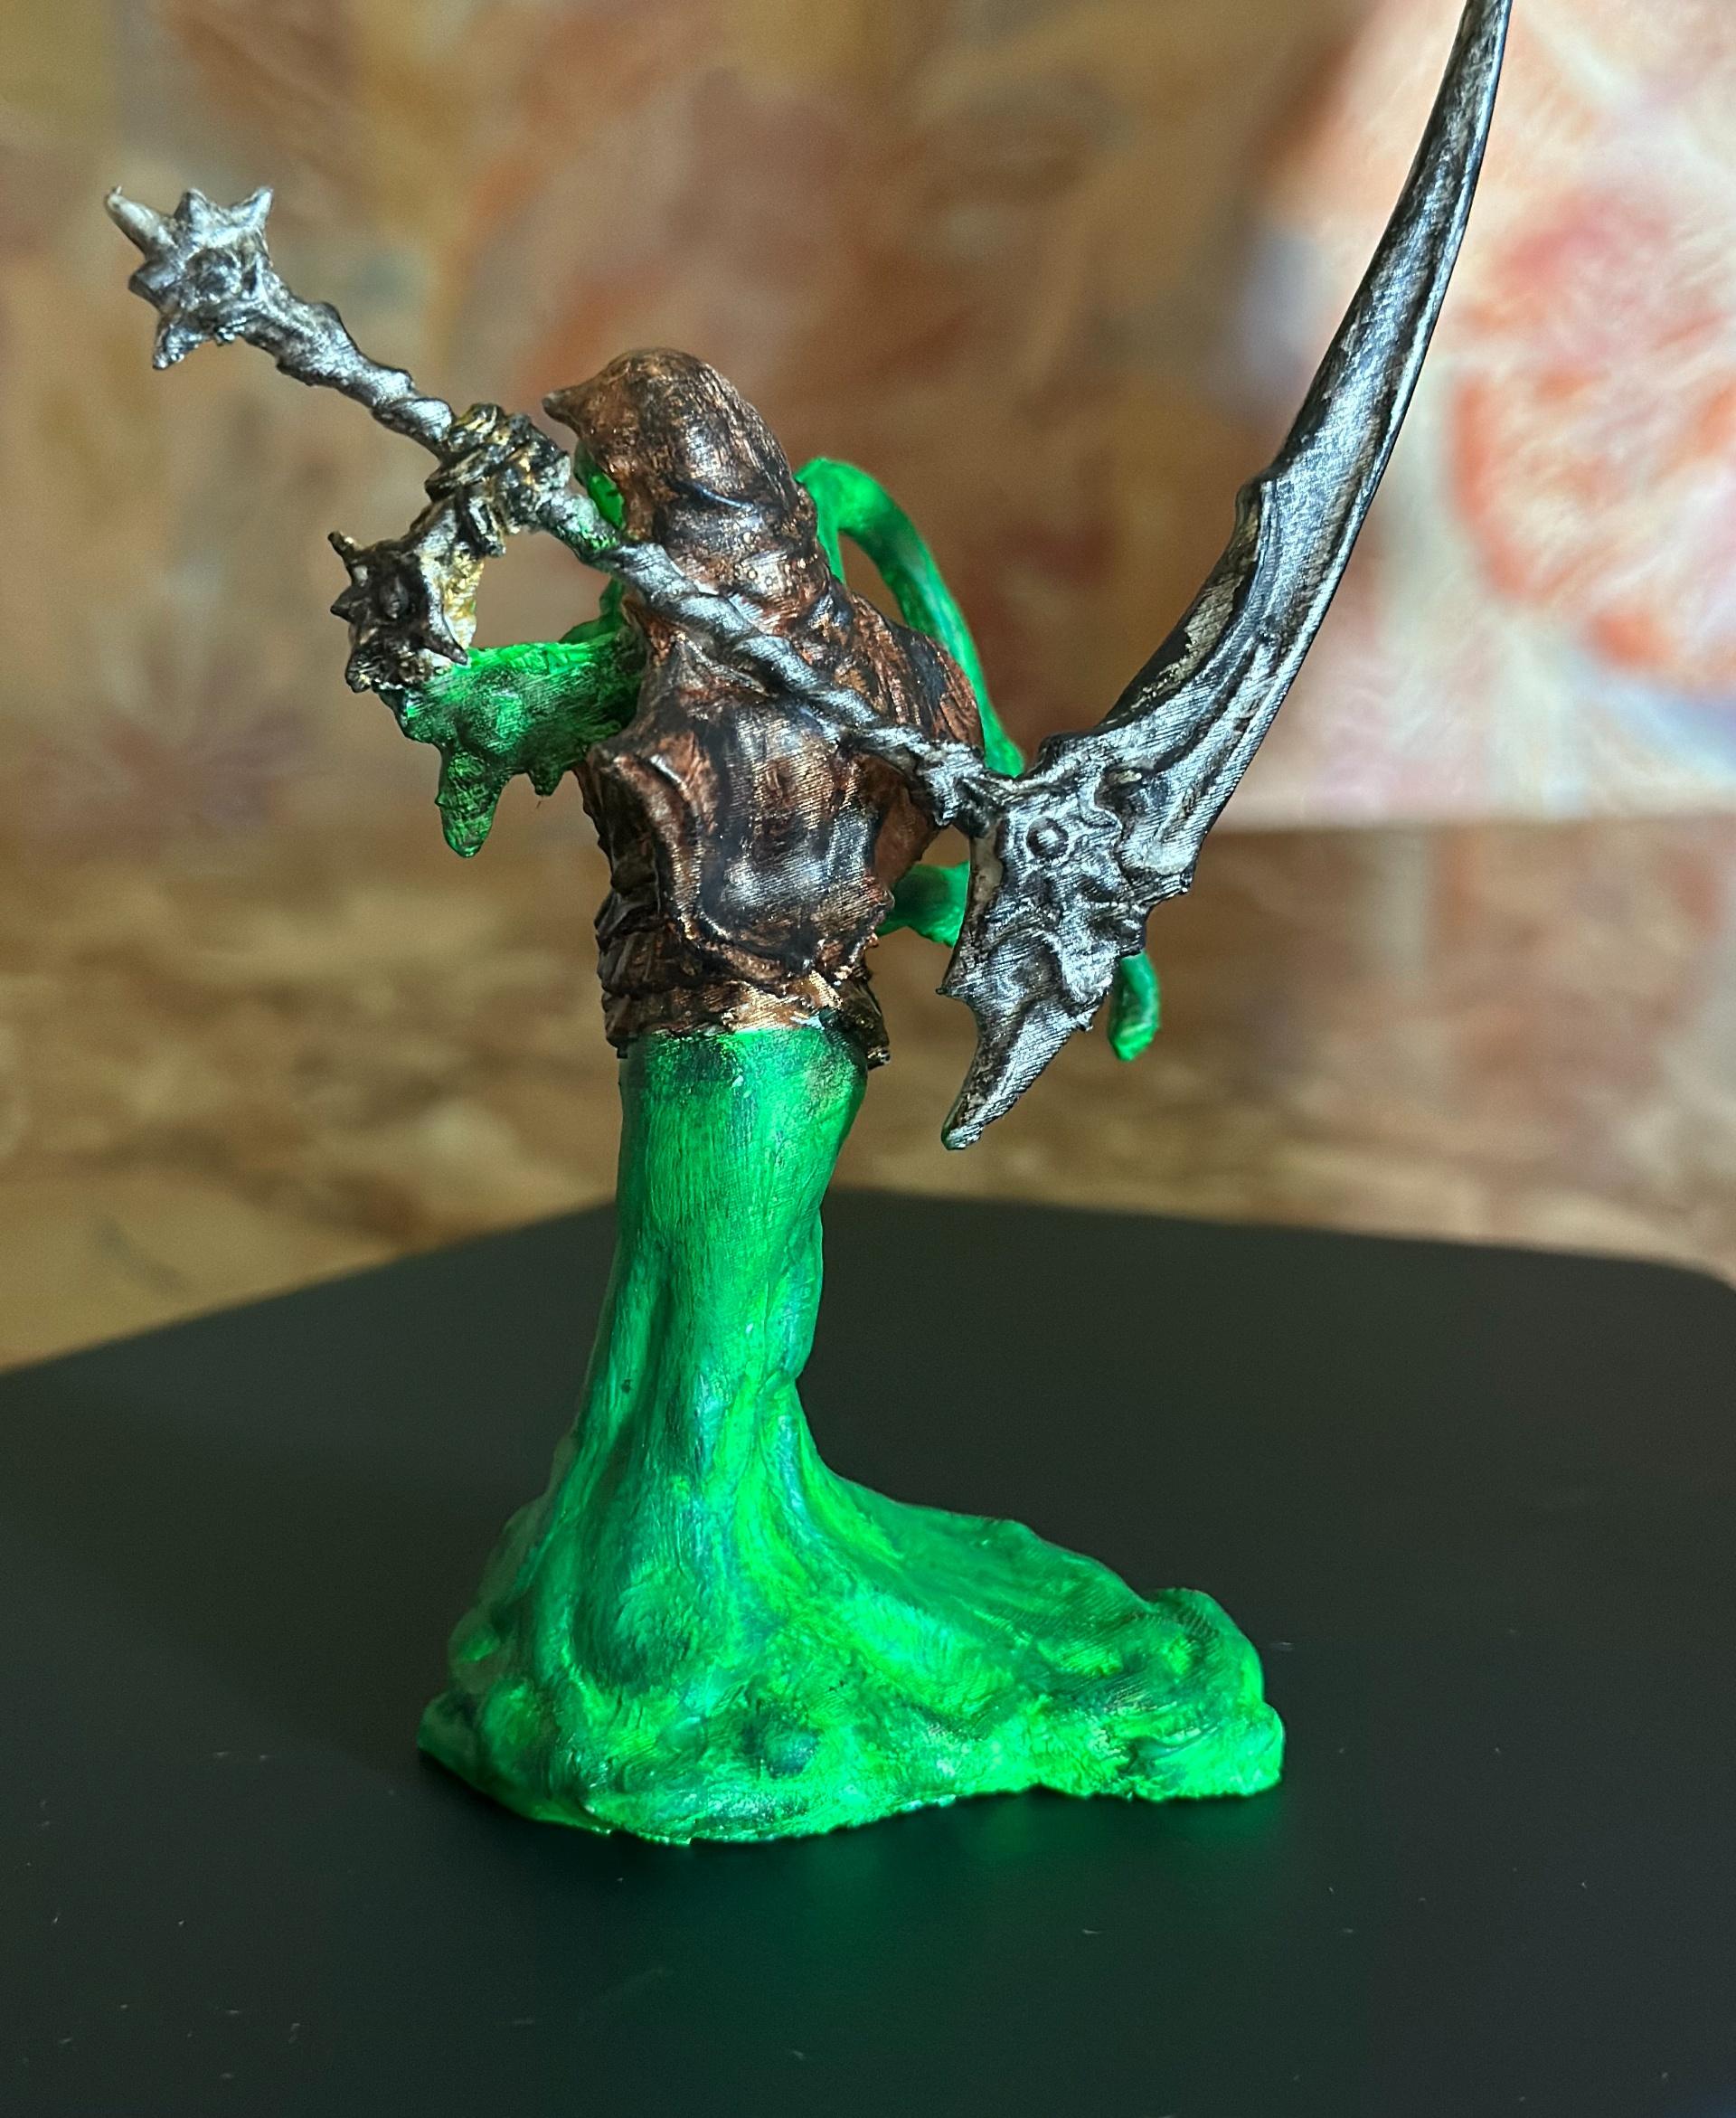 Gelatinous Slime Reaper - Amazing mini! Prints extremely well - even with an FDM printer! - 3d model